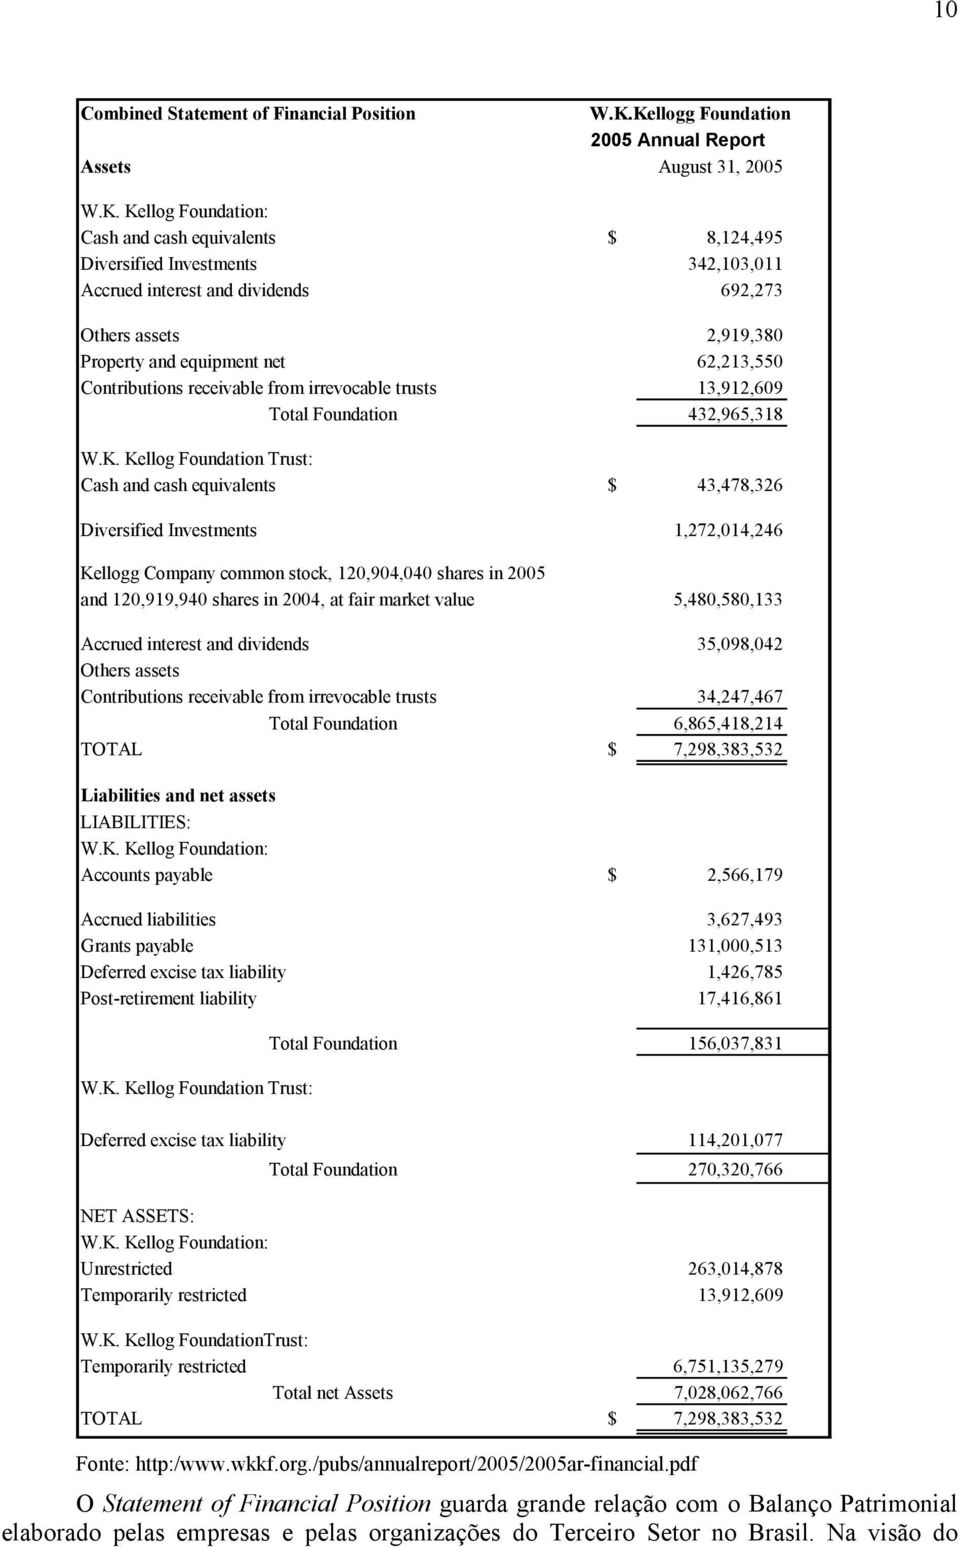 Others assets 2,919,380 Property and equipment net 62,213,550 Contributions receivable from irrevocable trusts 13,912,609 Total Foundation 432,965,318 W.K.